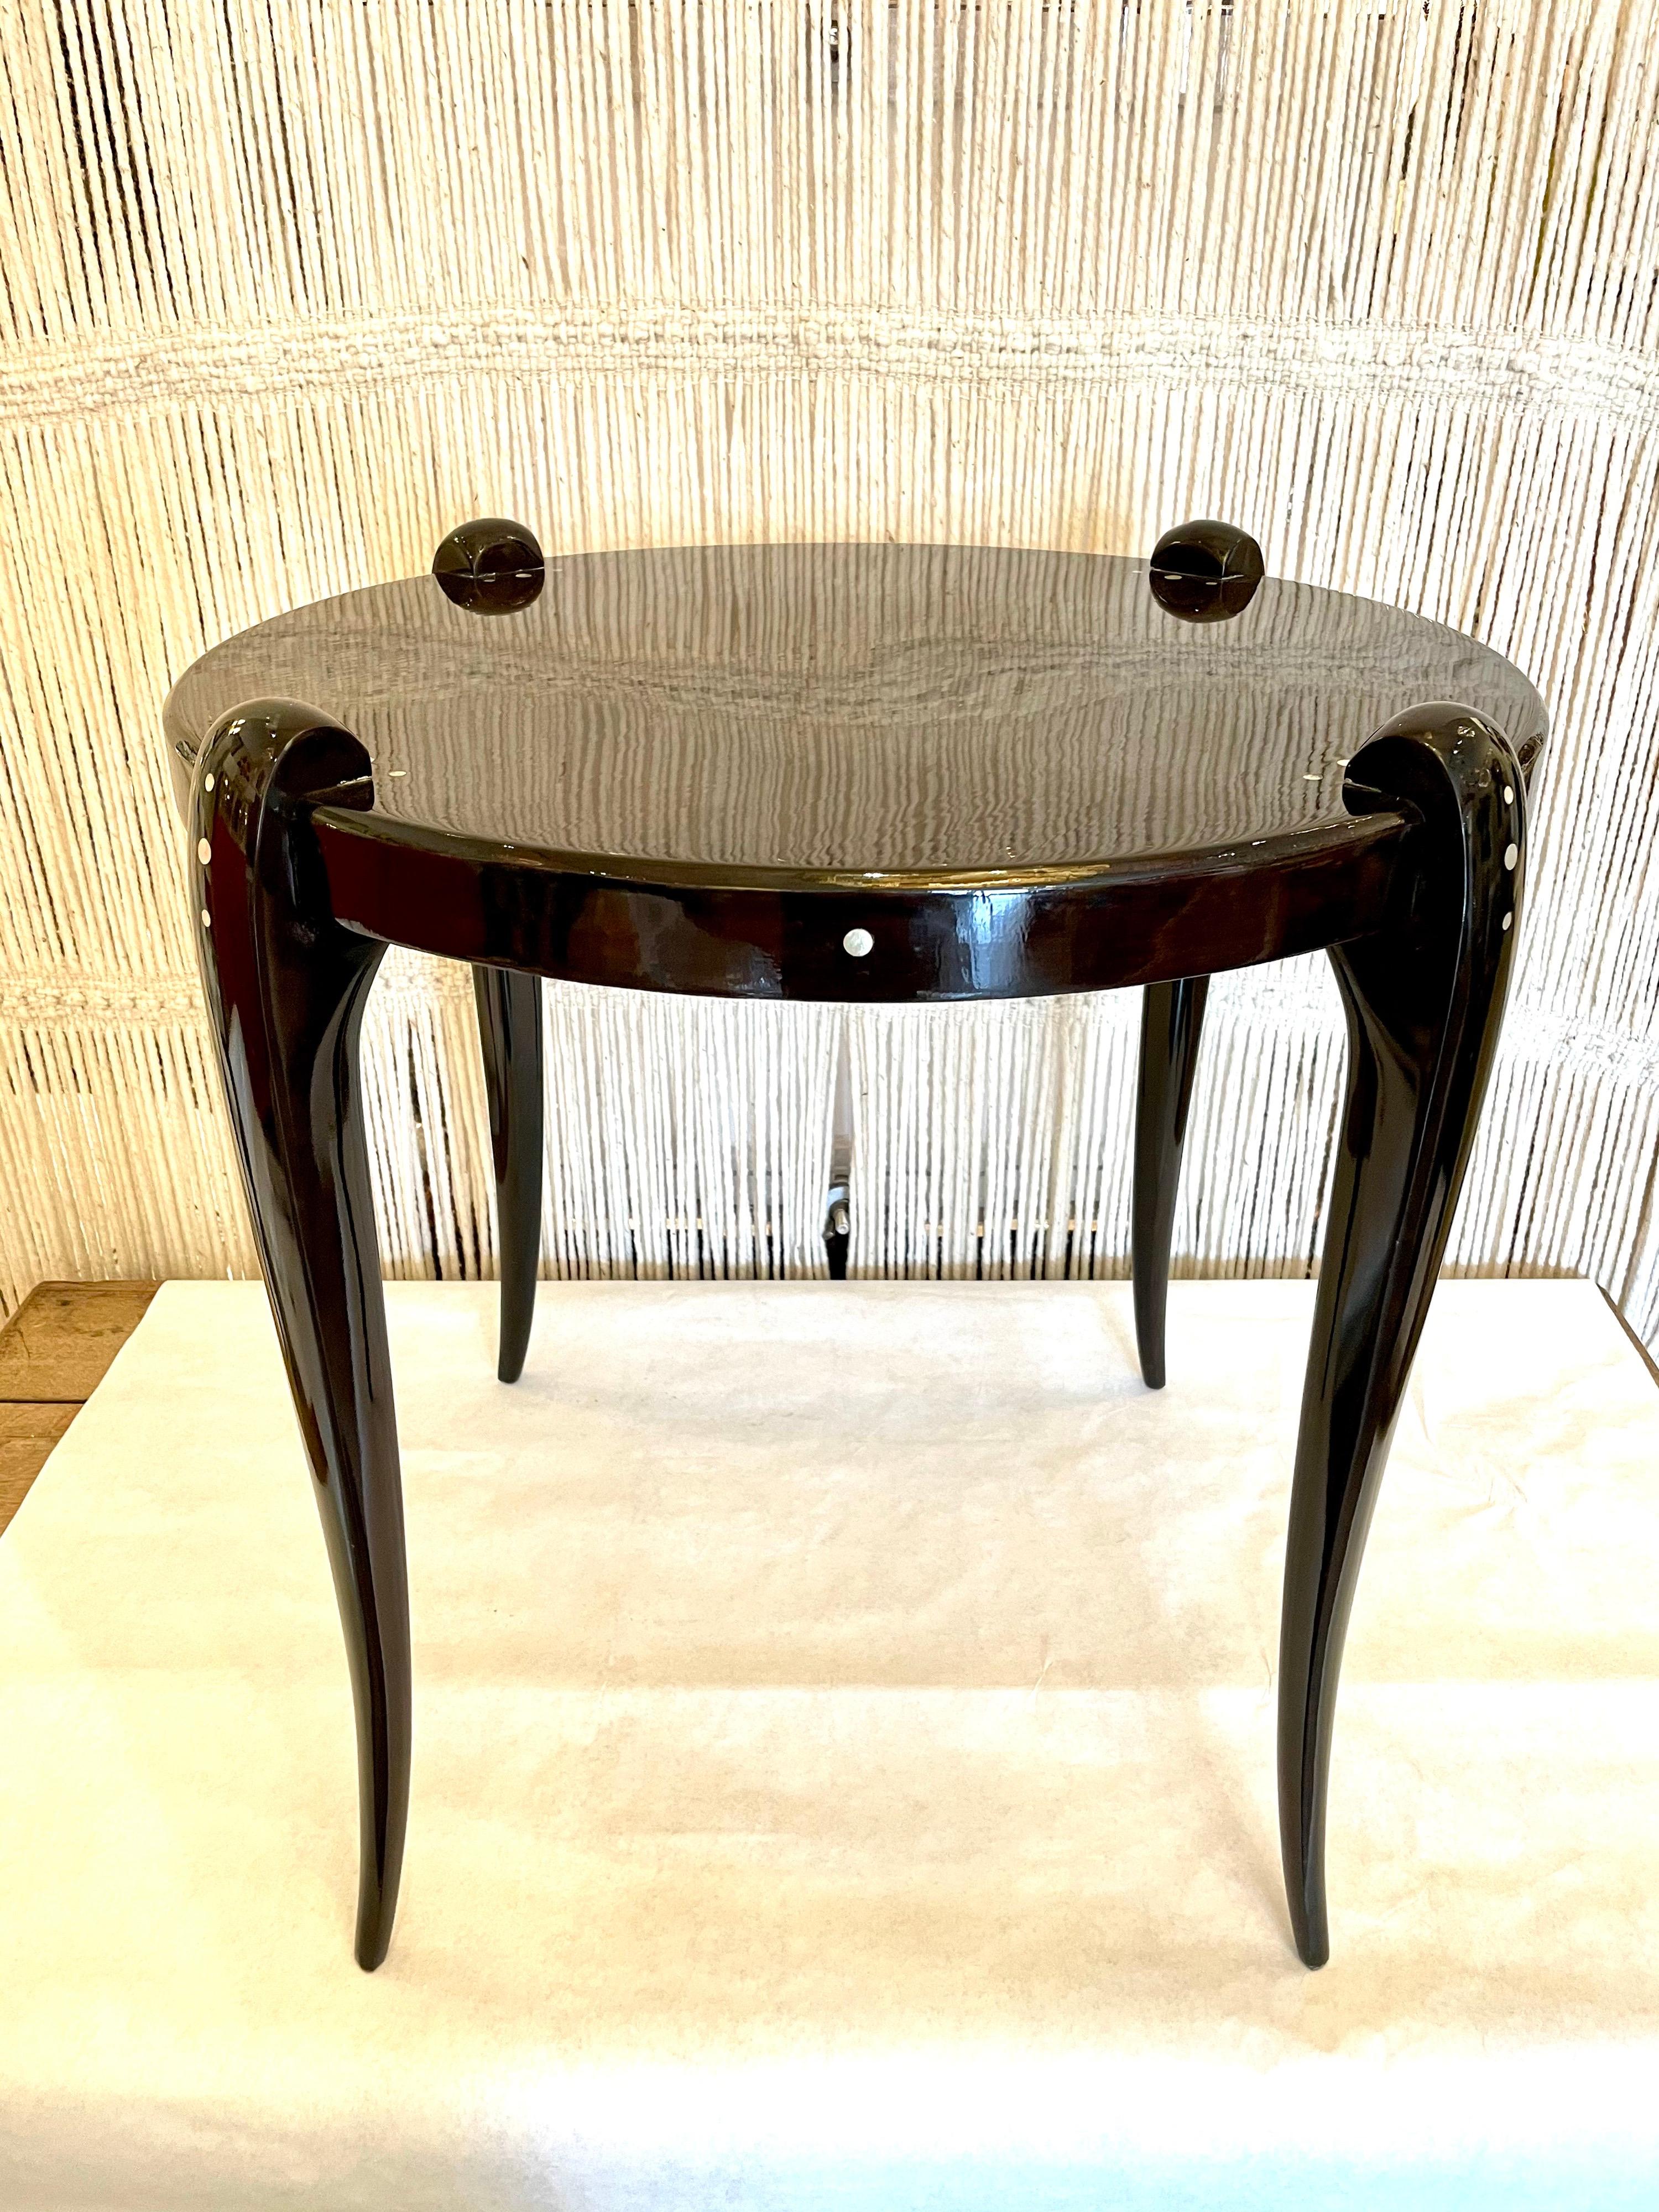 Very much in the style of the Art Deco master, Emile Ruhlmann, this cabriolet leg and round top Macassar wood table by Jallot in high lacquered finish, has mother of pearl inlay.